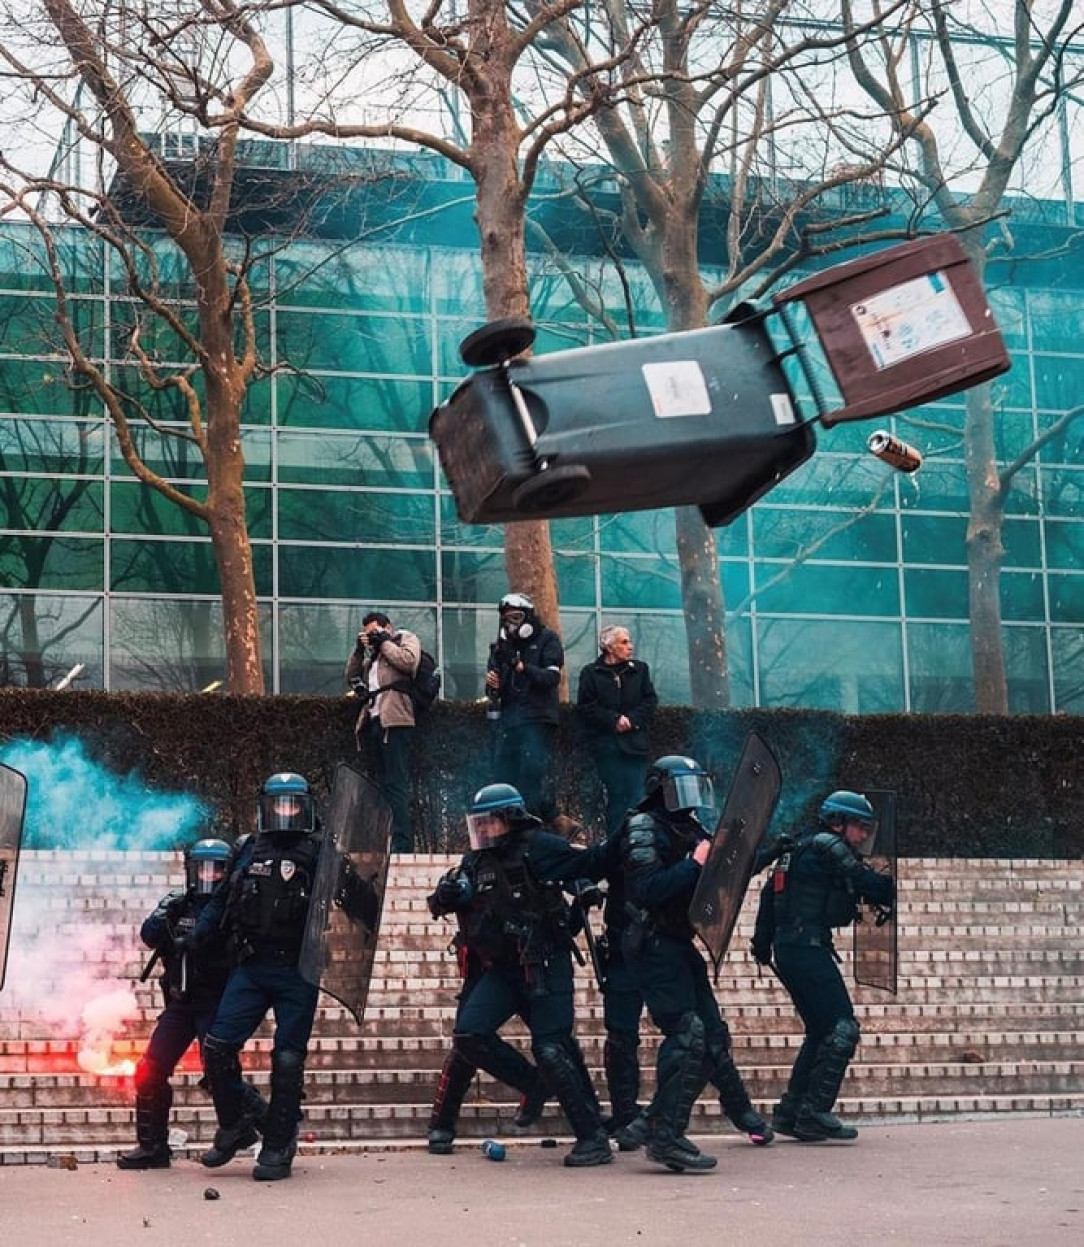 Rioting during the demonstration against pension reform in France